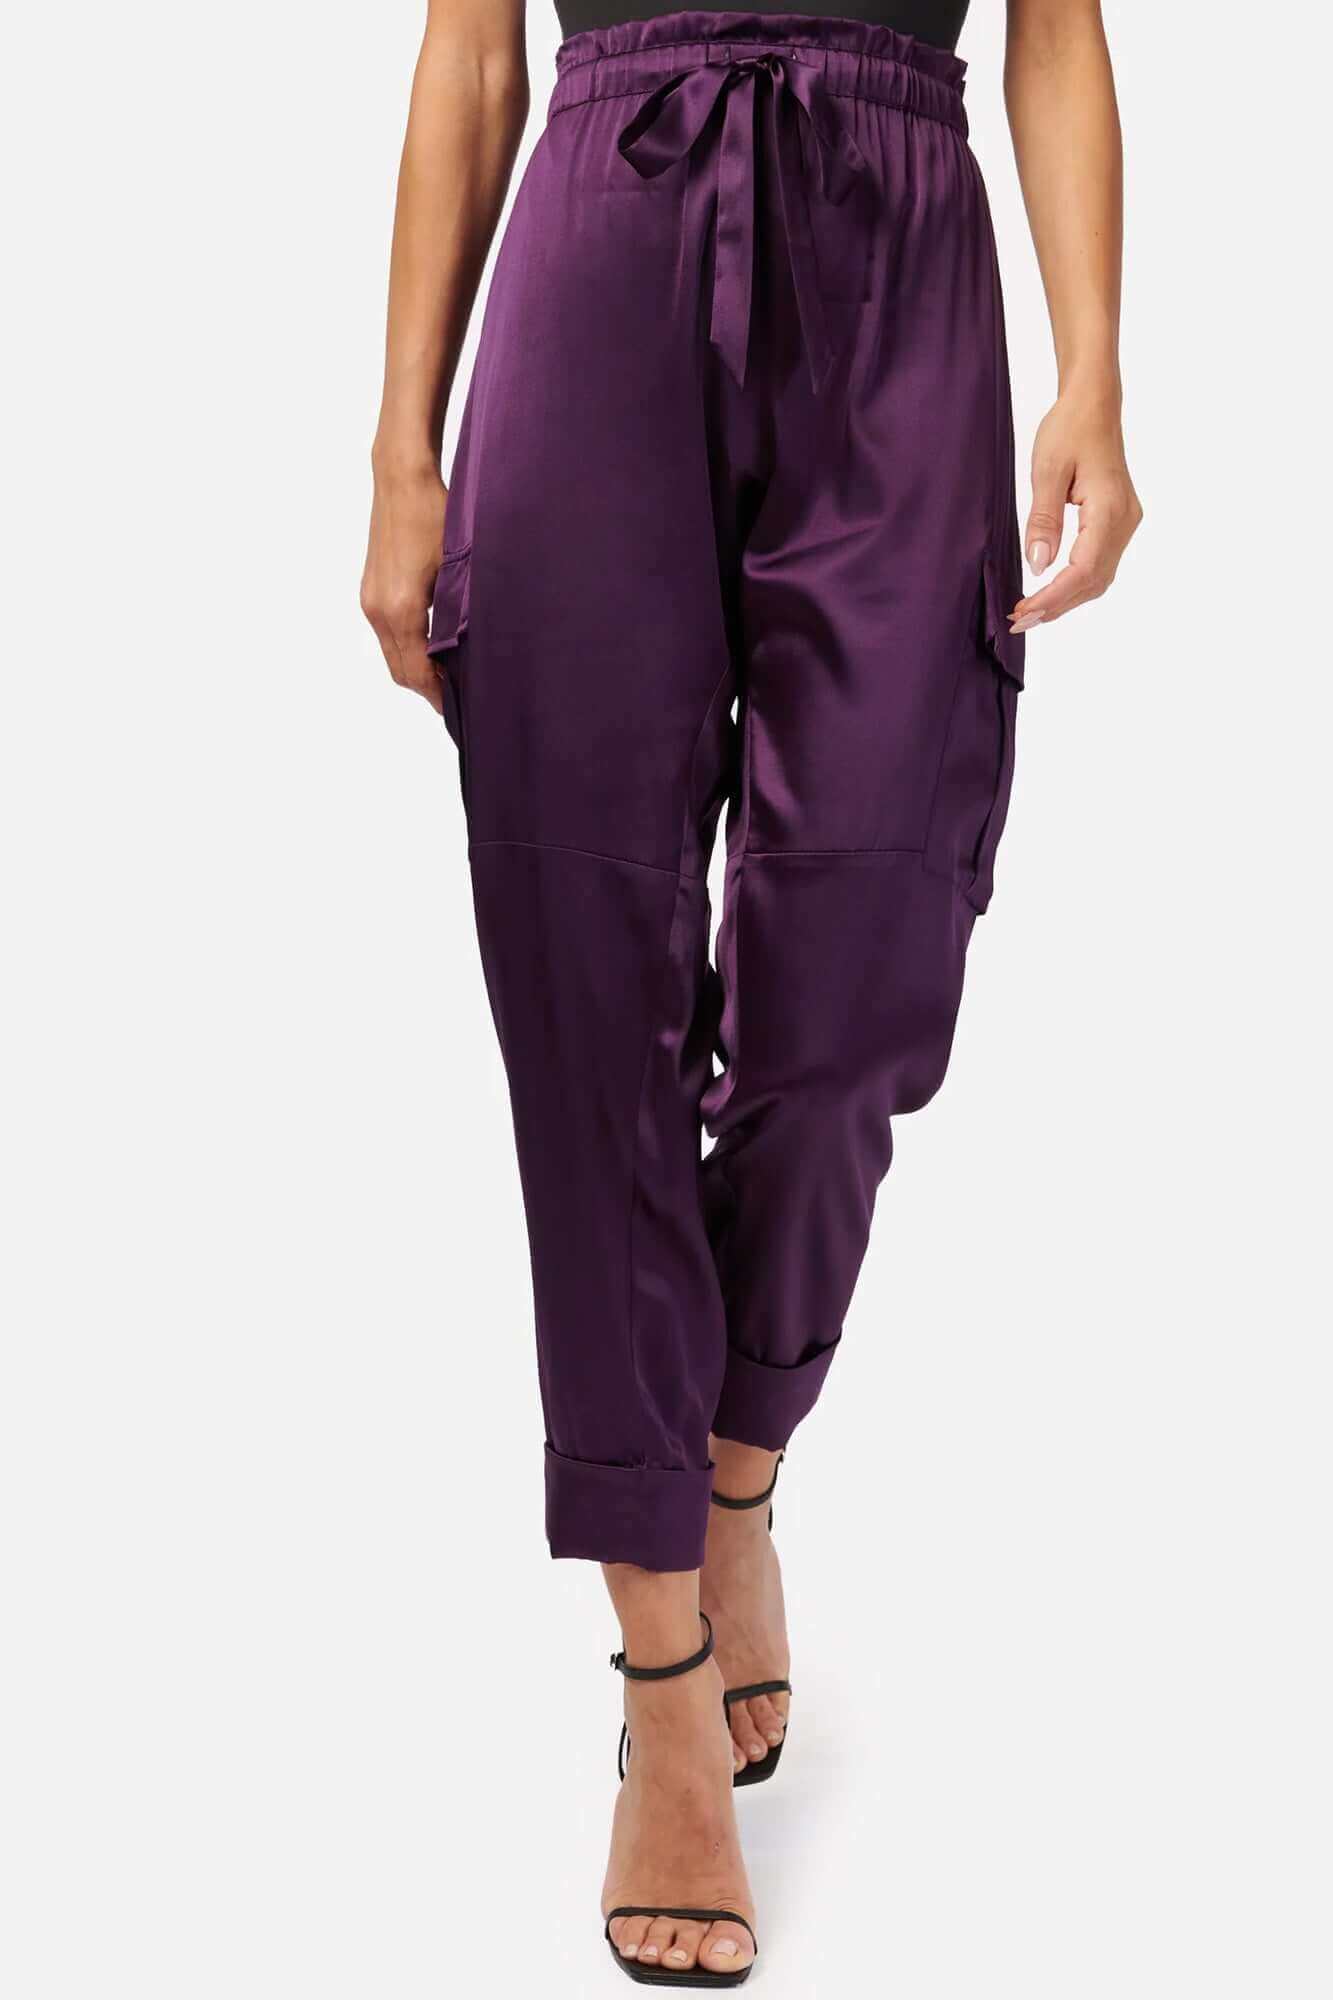 CAMI NYC Jill Pant in Black: Classic and Comfortable Pants - I Am